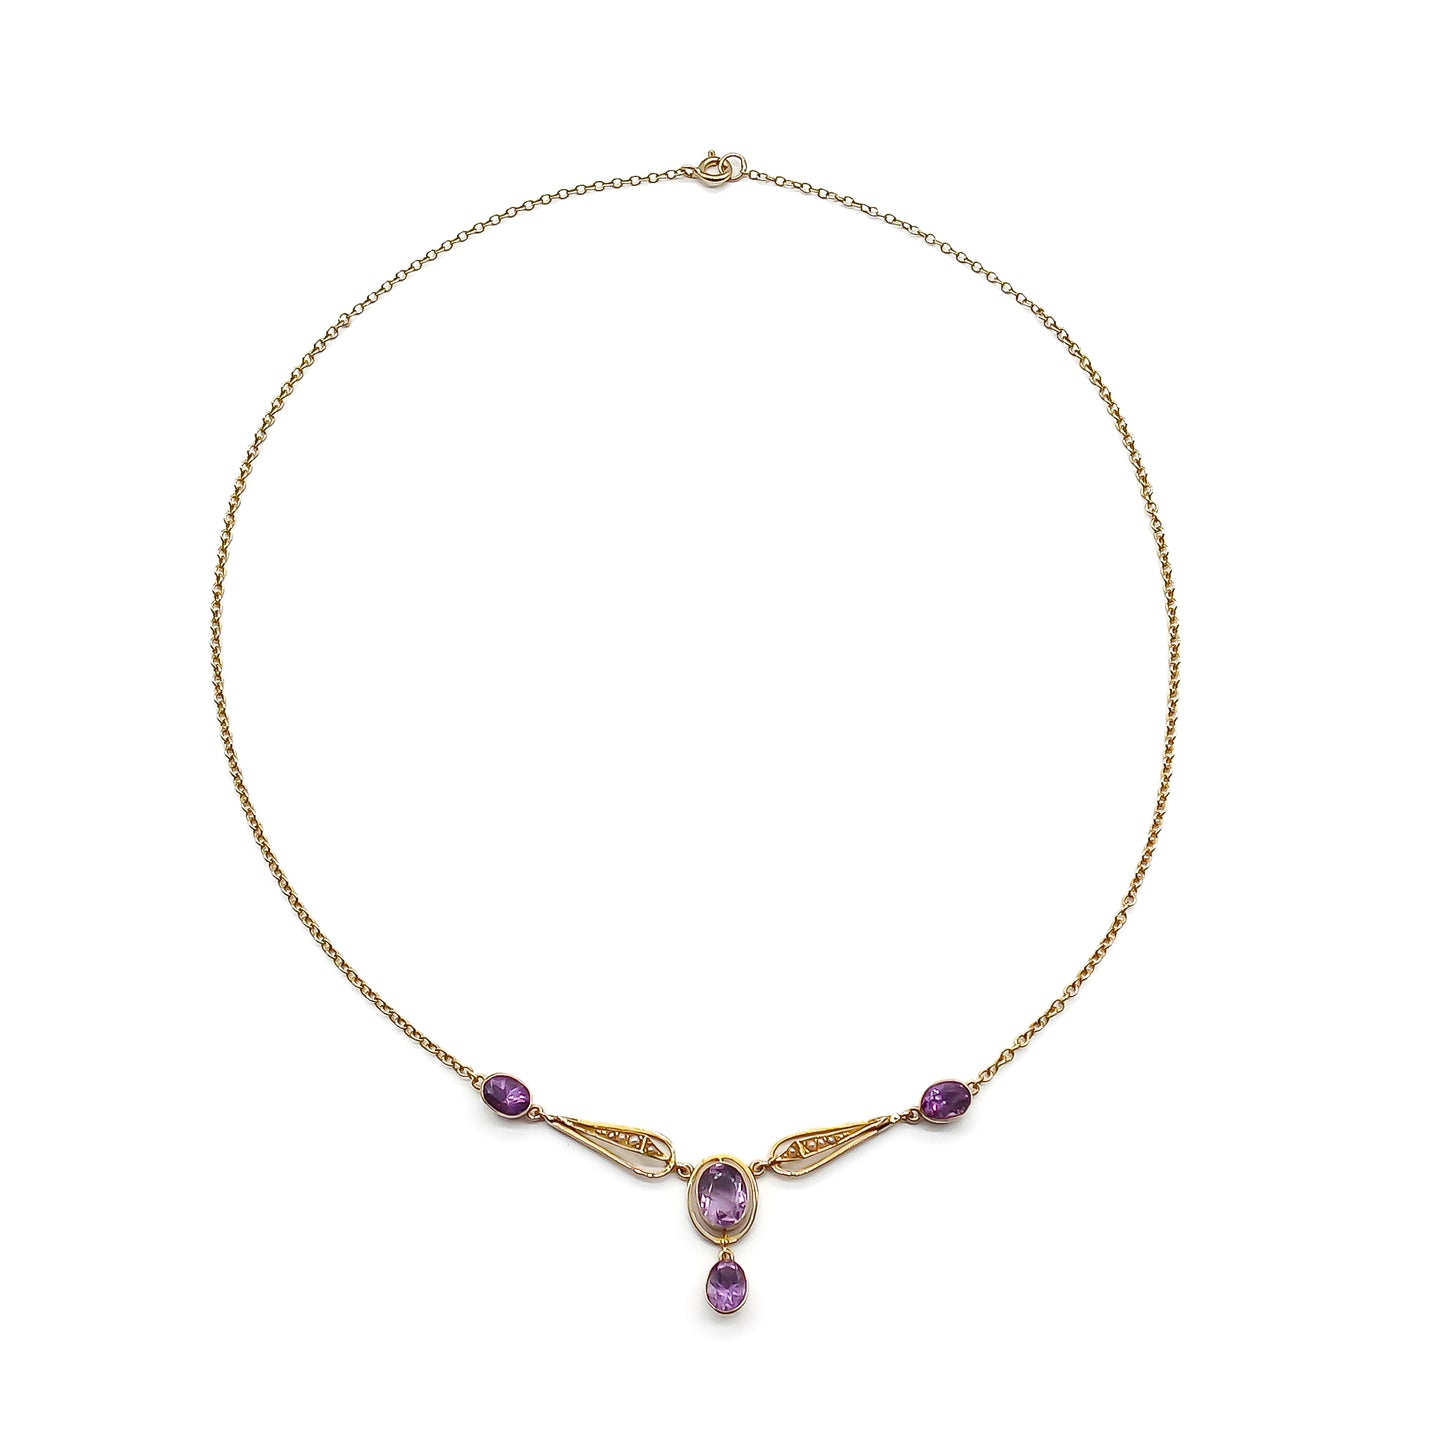 Gorgeous 15ct gold Edwardian necklace set with four beautifully faceted oval amethysts and eight small seed pearls.